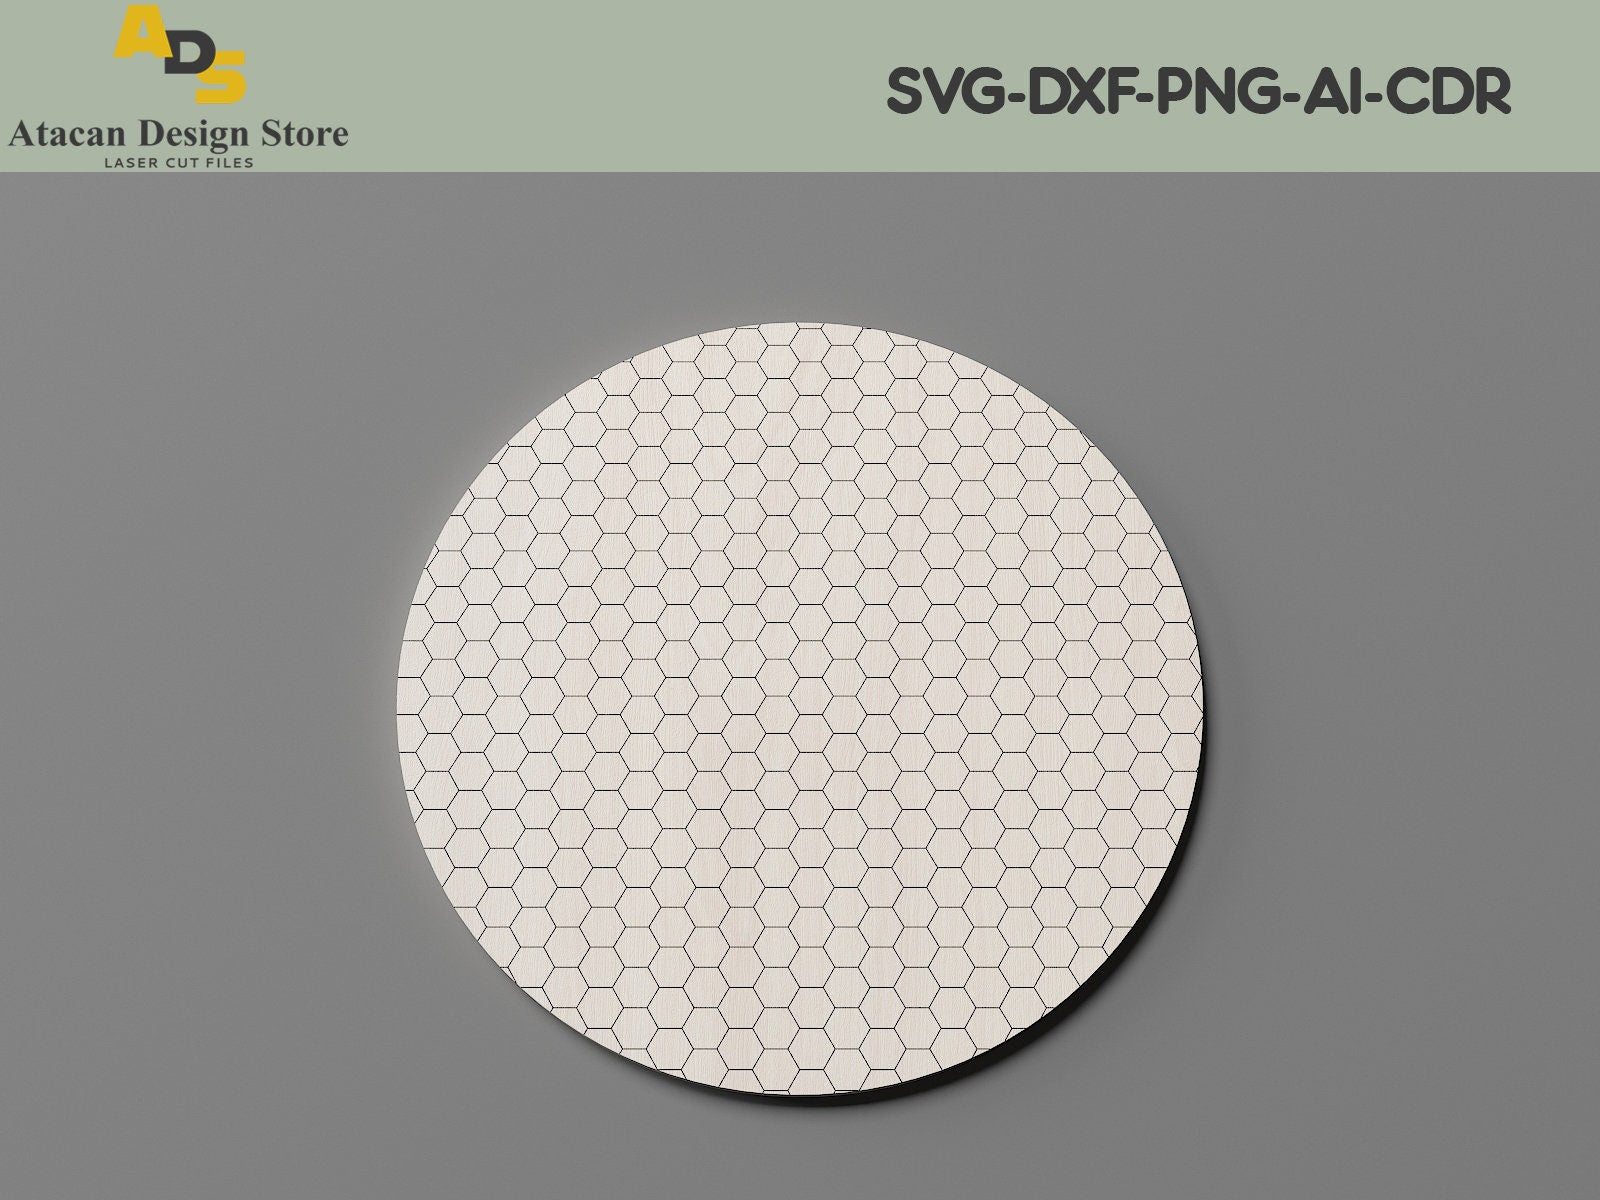 18 inch Round With Honeycomb 4 Different Patterns Svg, Dxf, Cdr, Ai files ADS225